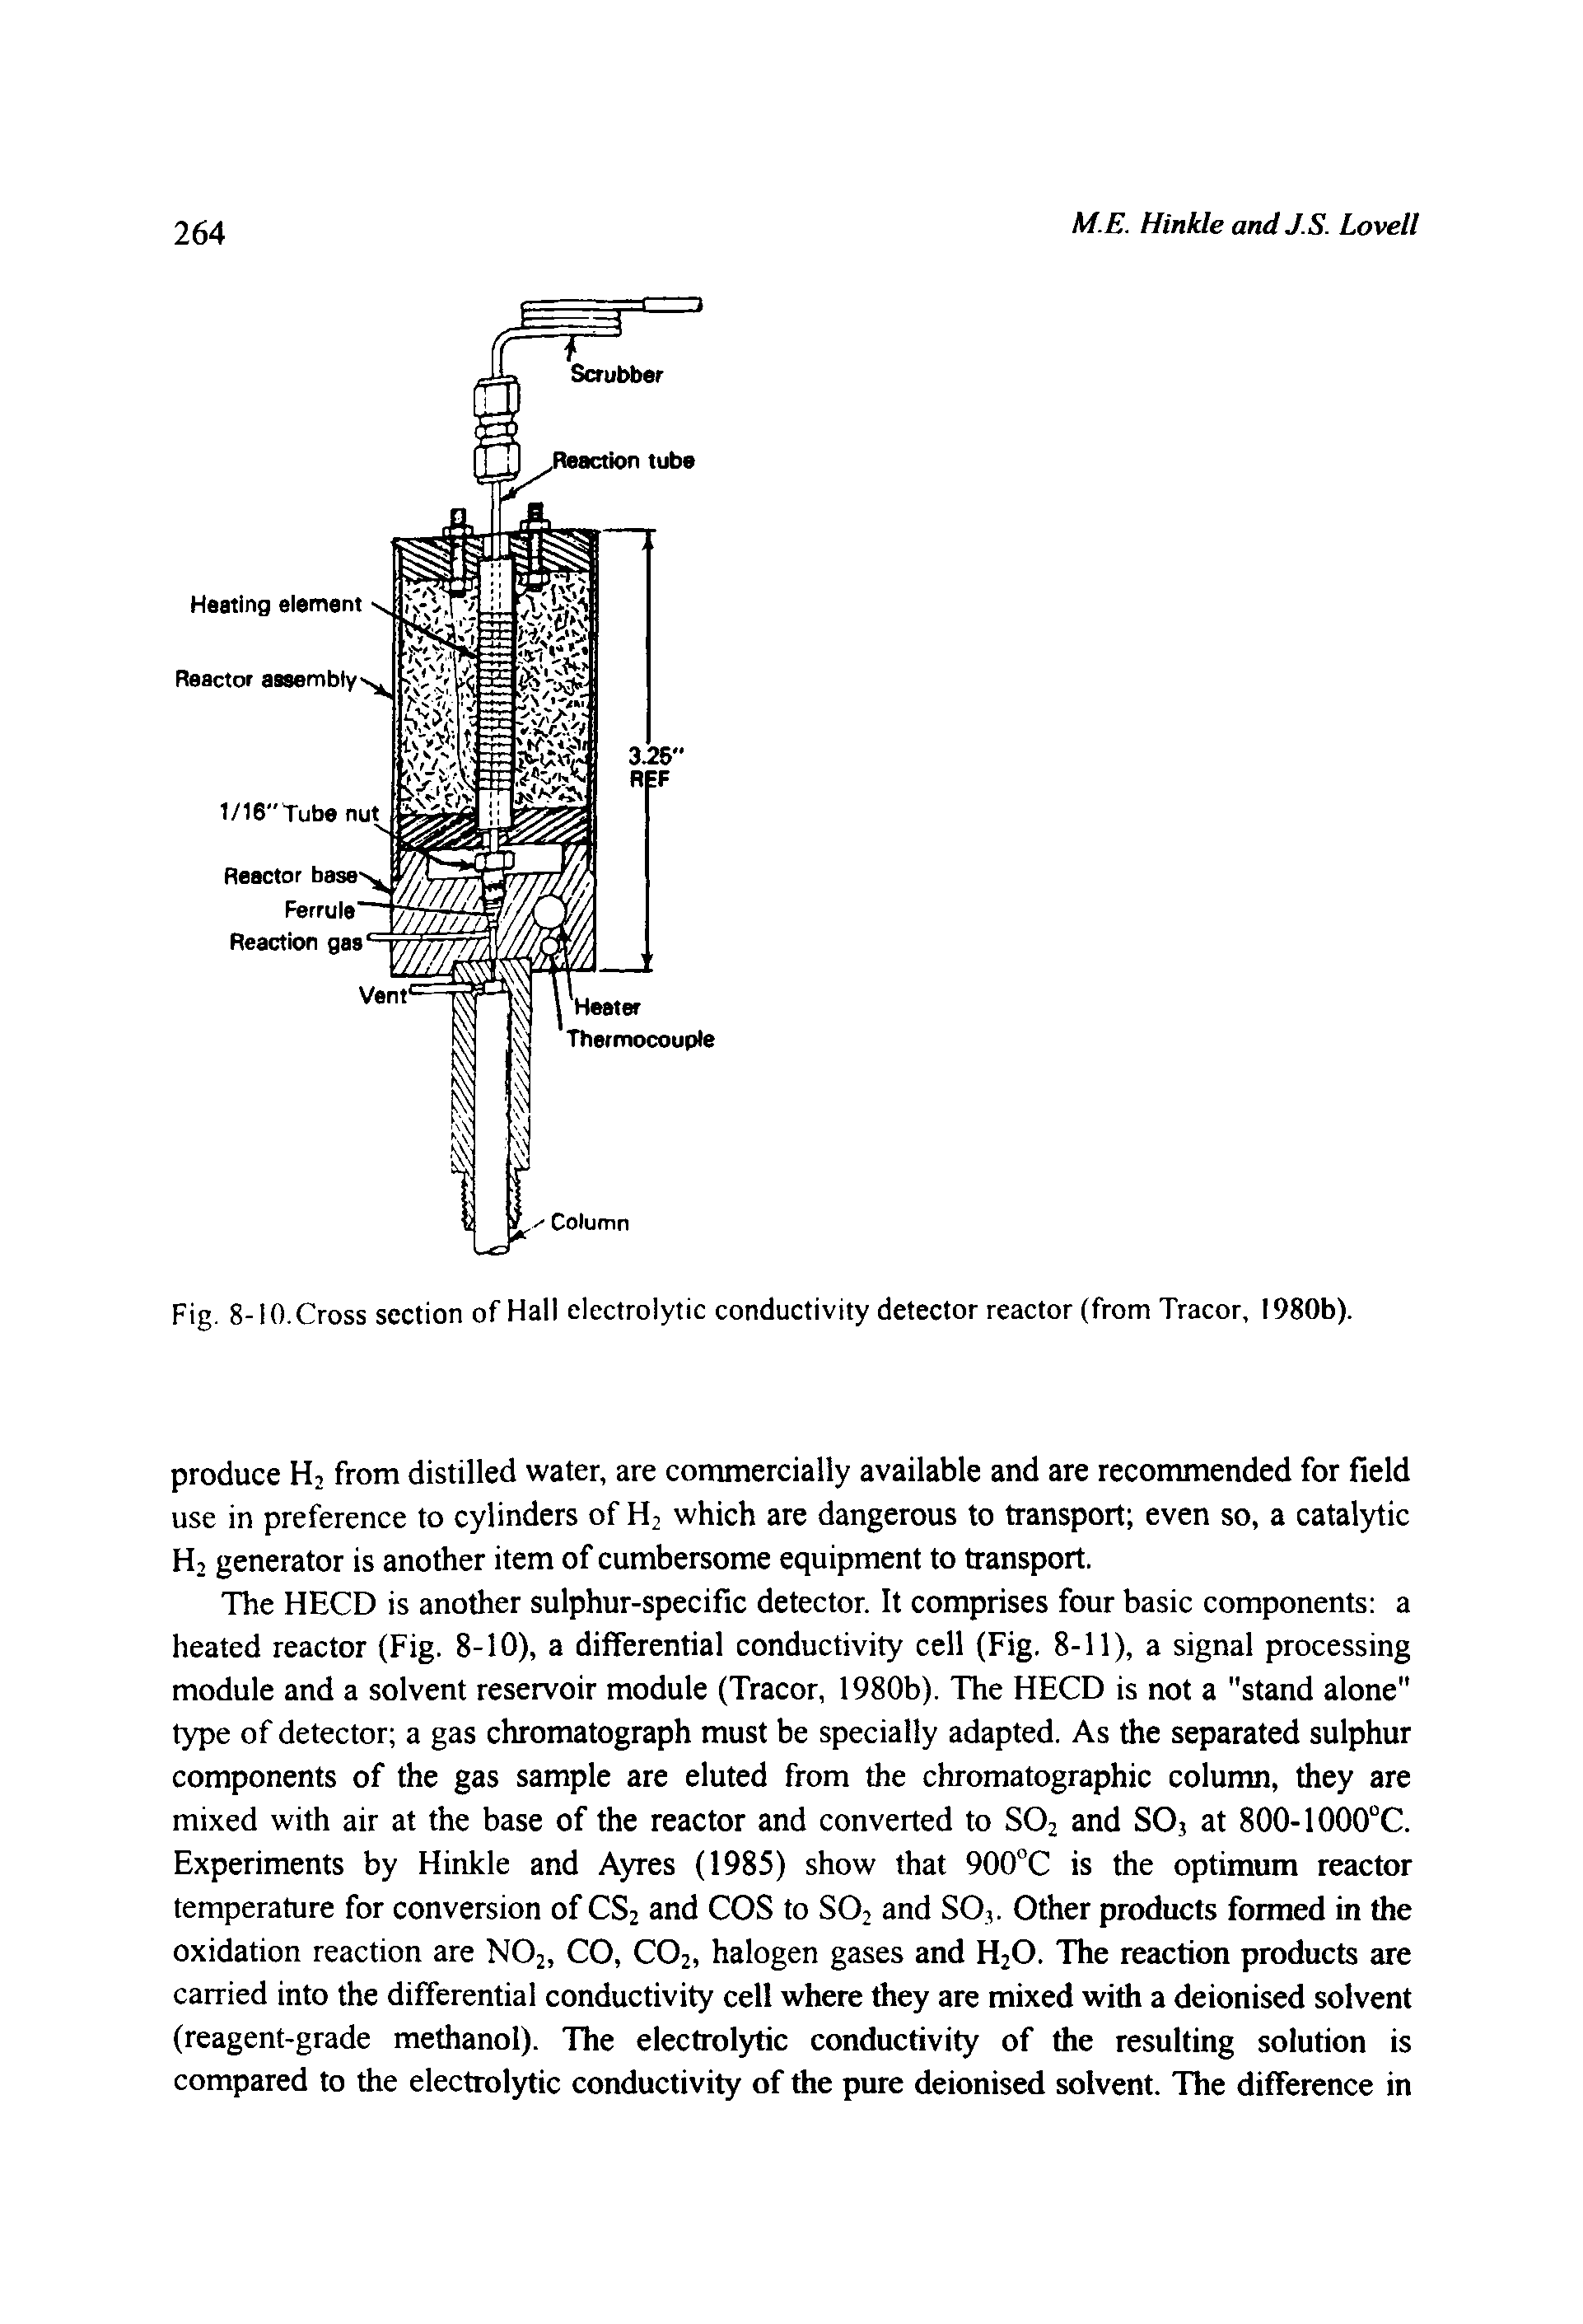 Fig. 8-10. Cross section of Hall electrolytic conductivity detector reactor (from Tracor, 1980b).